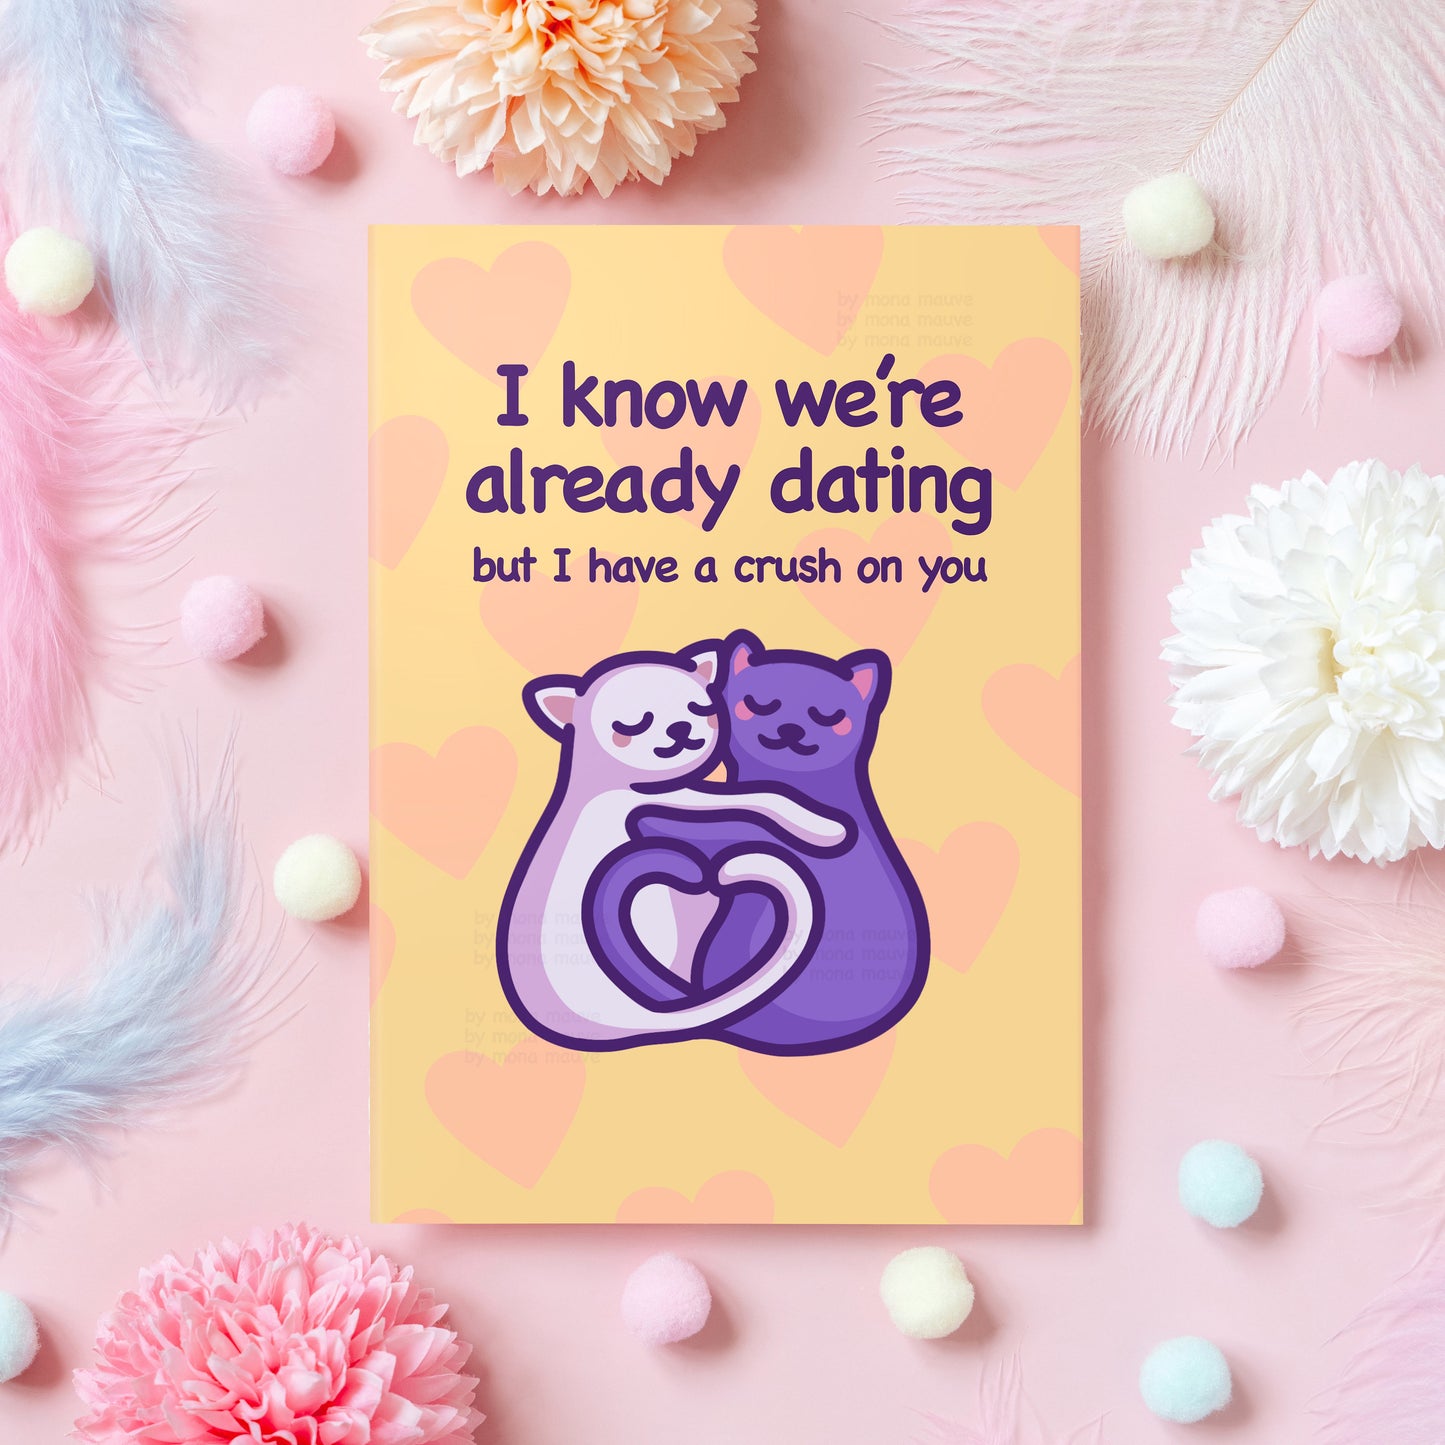 Funny Anniversary Card | I Know We're Dating, but I Have a Crush on You | For Boyfriend, Girlfriend, Partner | Gift for Her or Him